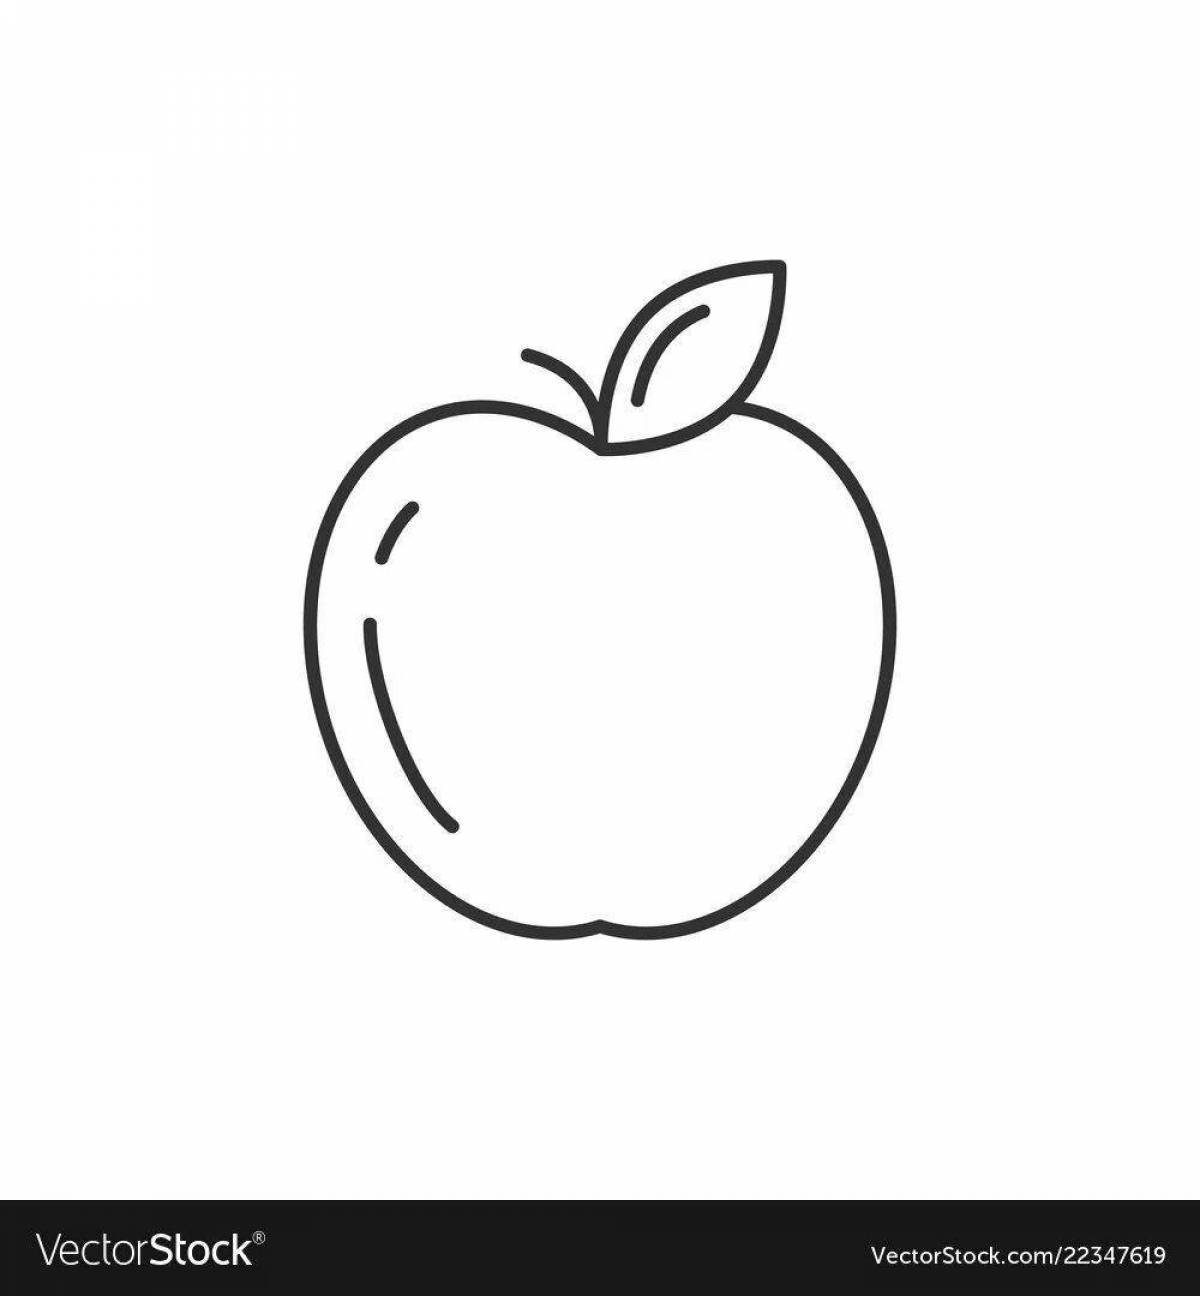 Coloring book shiny apple icon